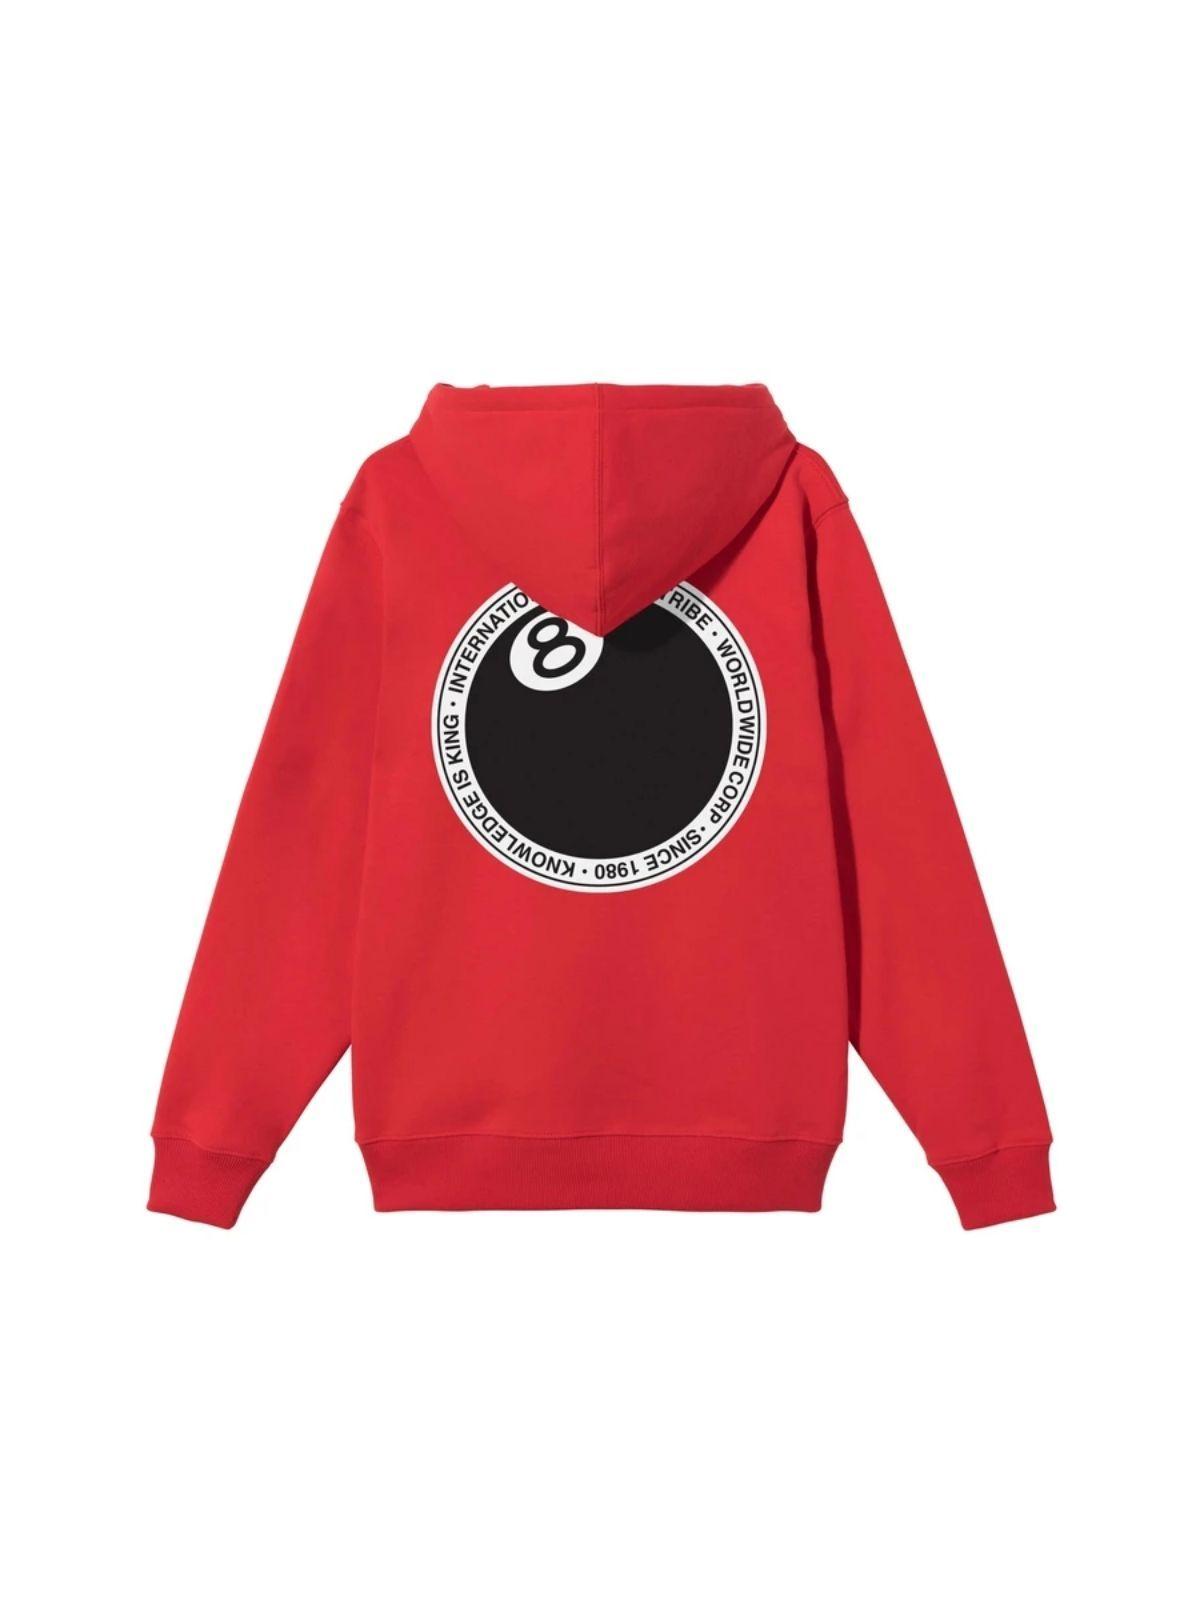 Stussy Cotton 8 Ball Printed Hoodie in Red for Men - Lyst